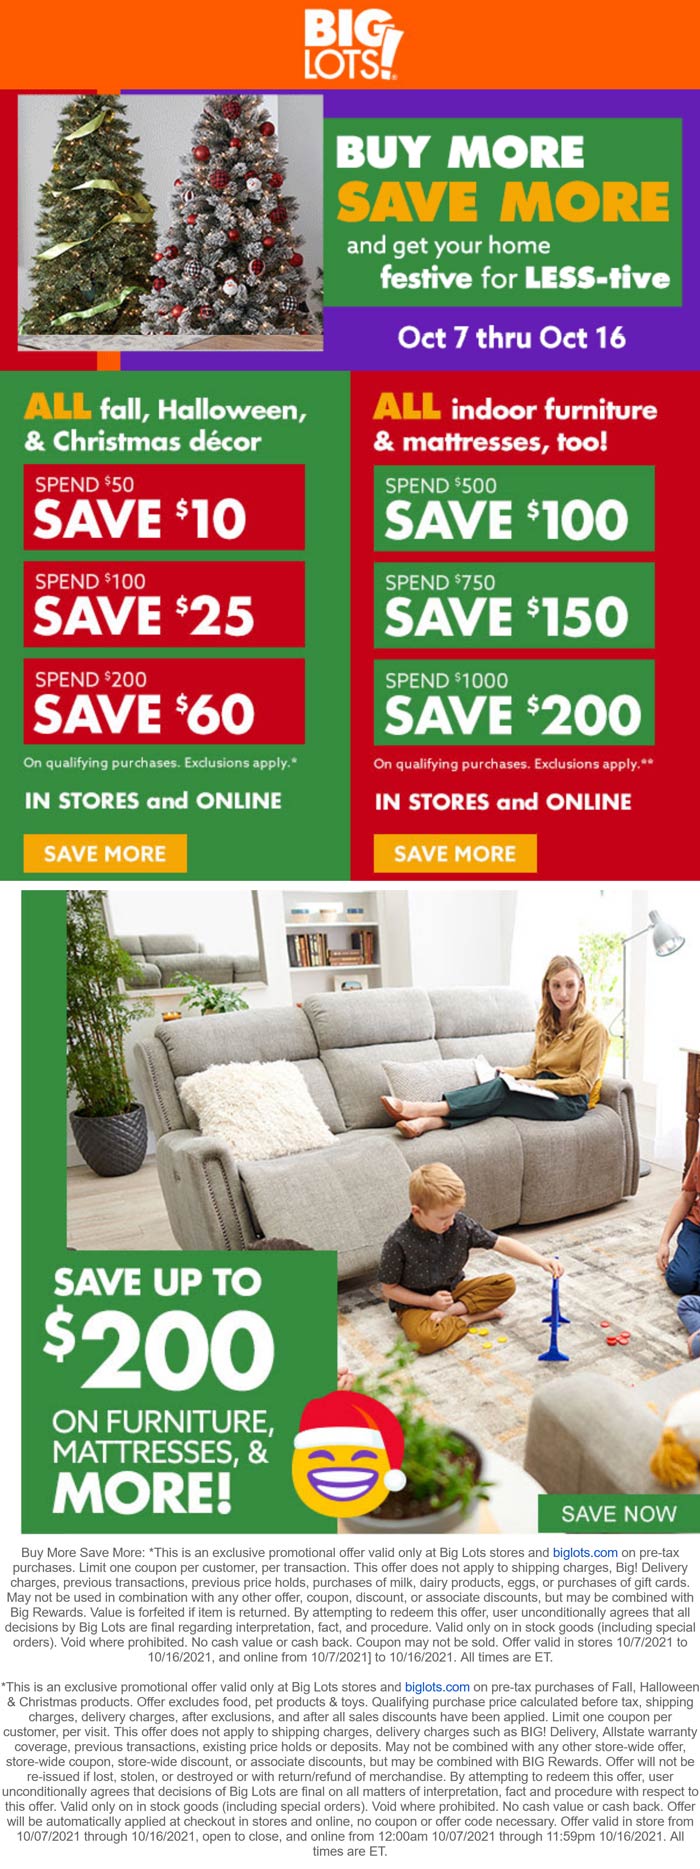 Big Lots stores Coupon  $10-$60 off $50+ on fall, Halloween & Christmas decor at Big Lots, ditto online #biglots 